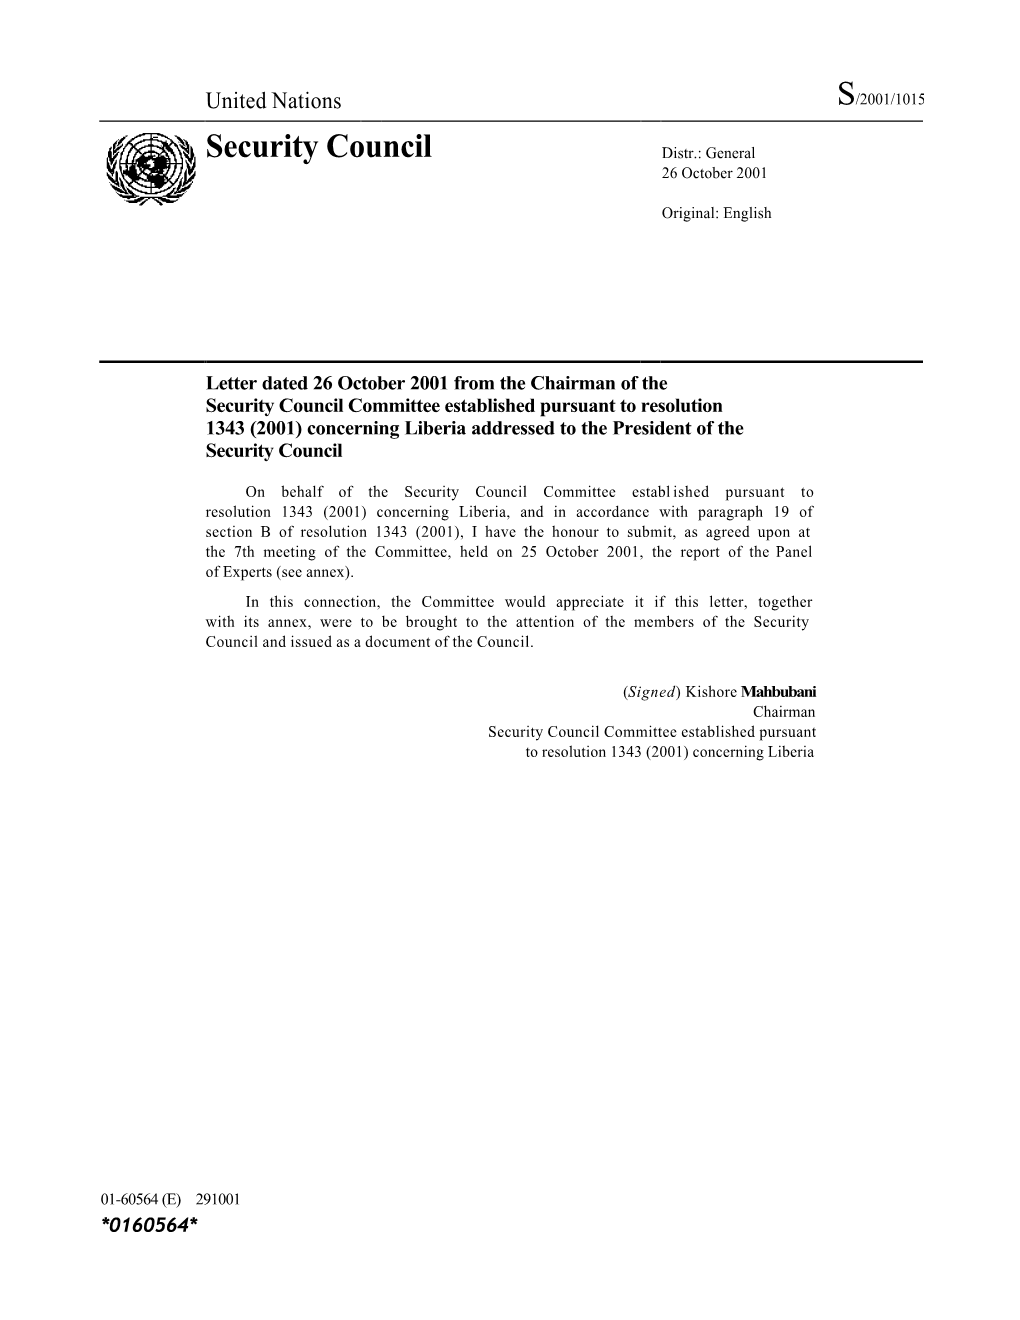 Report of the Panel of Experts Pursuant to Security Council Resolution 1343 (2001), Paragraph 19, Concerning Liberia